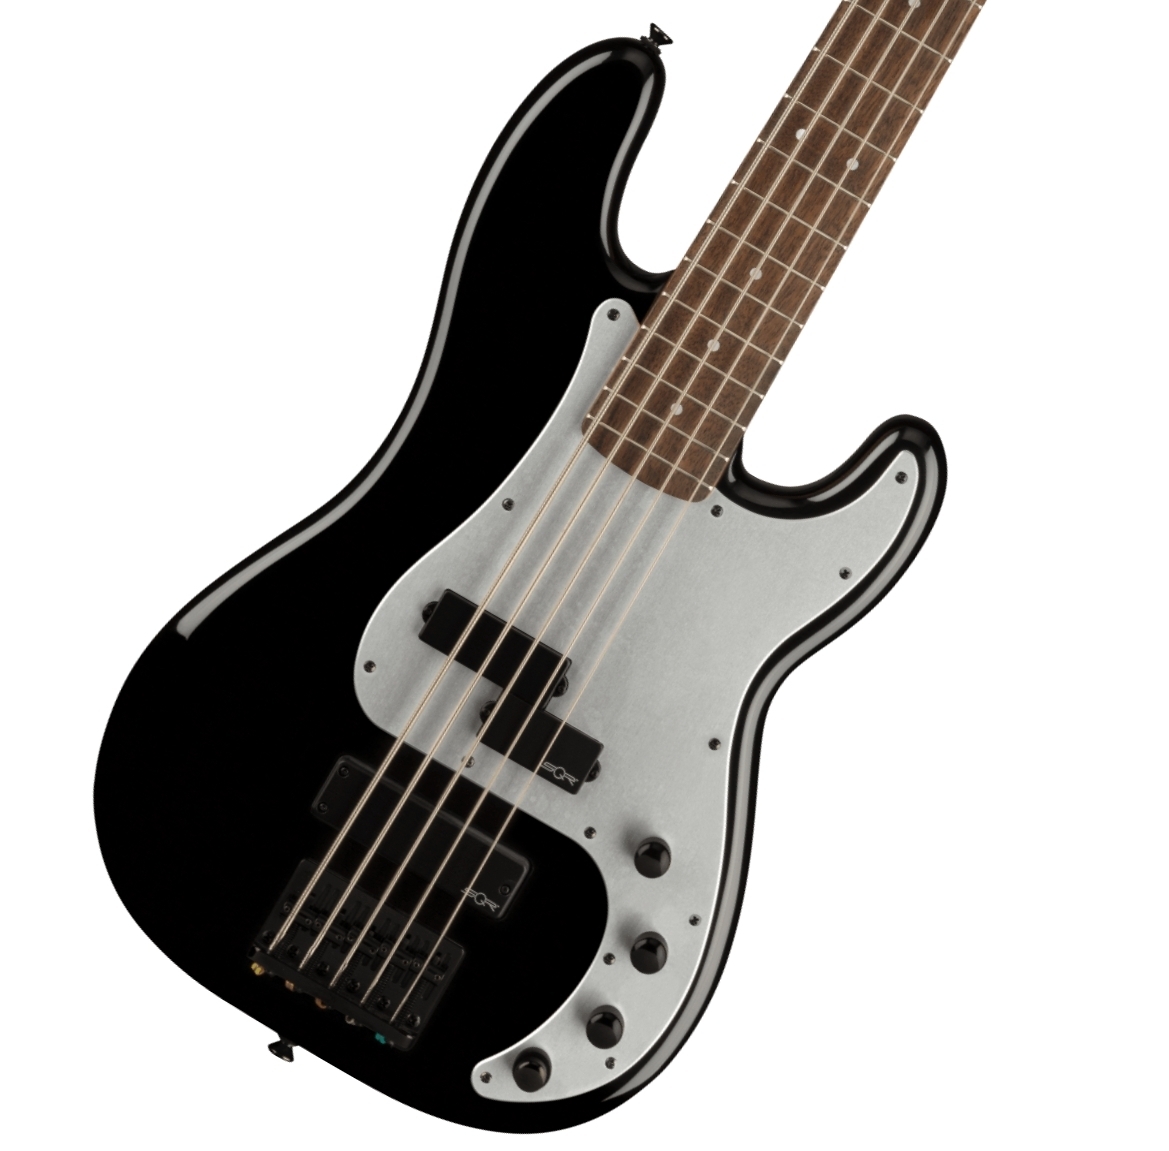 squier by fender 5弦ベース フェンダー スクワイヤーBASS-